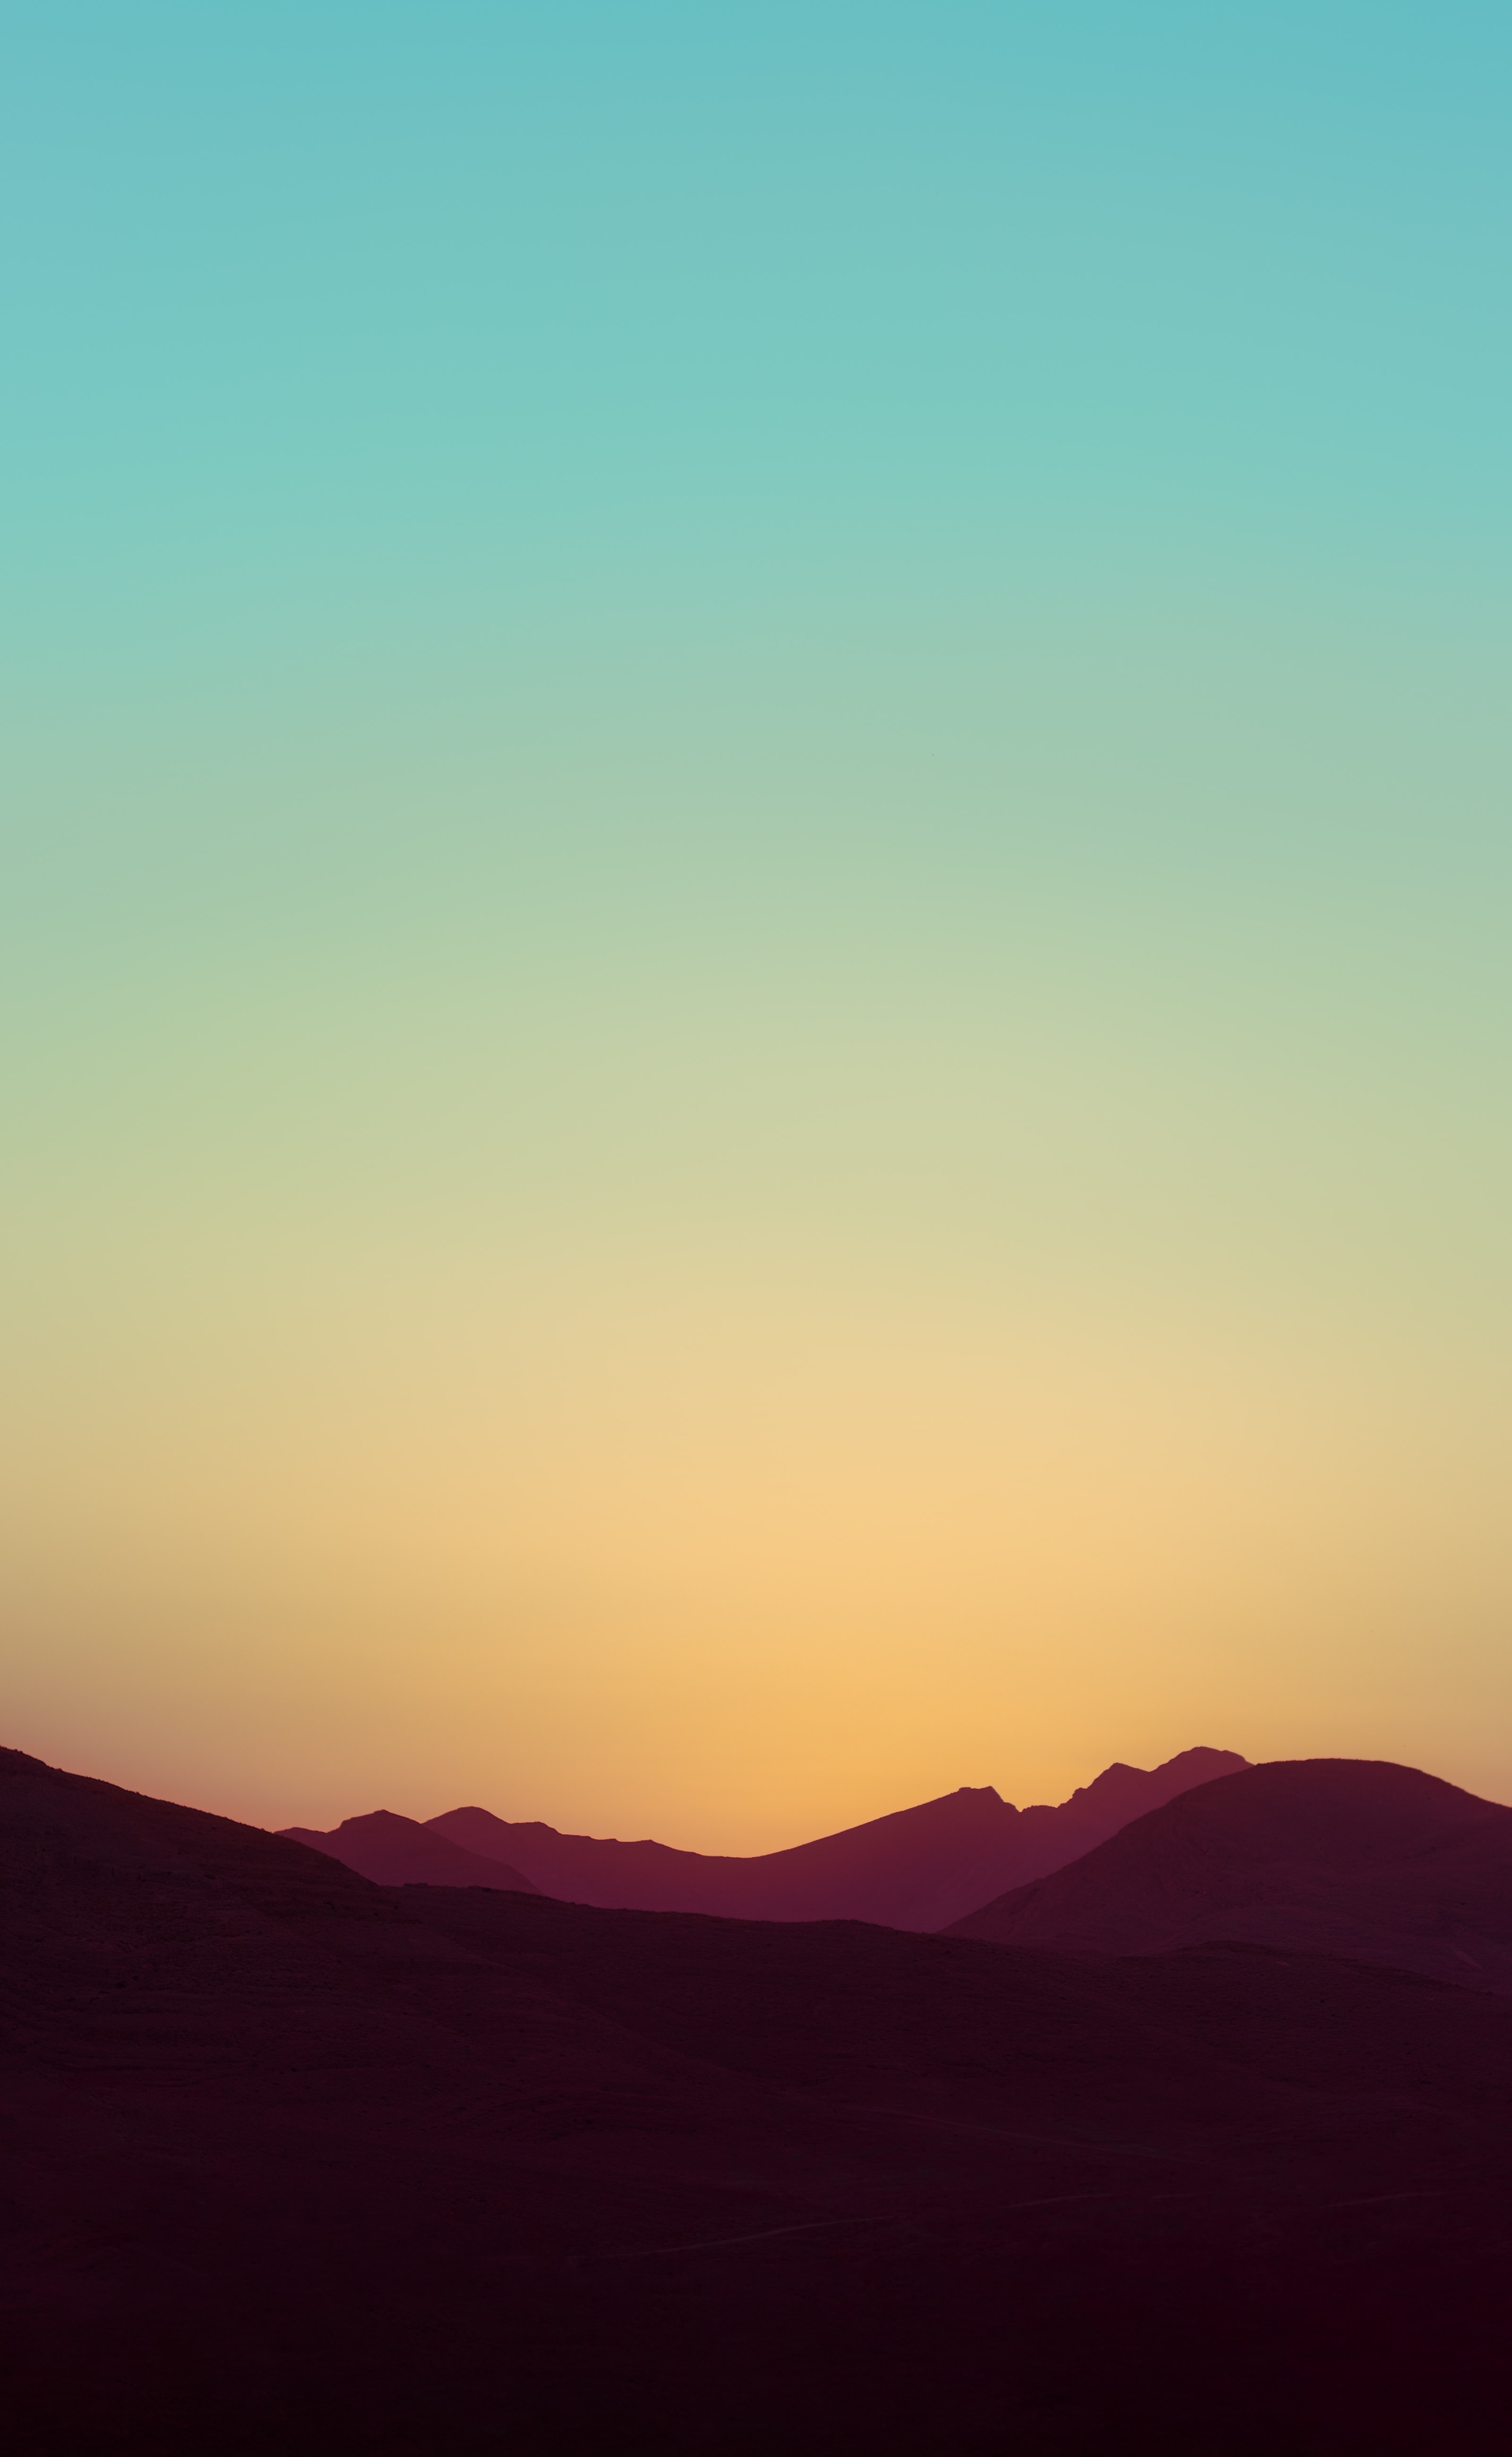 hills, nature, sunset, sky, relief QHD